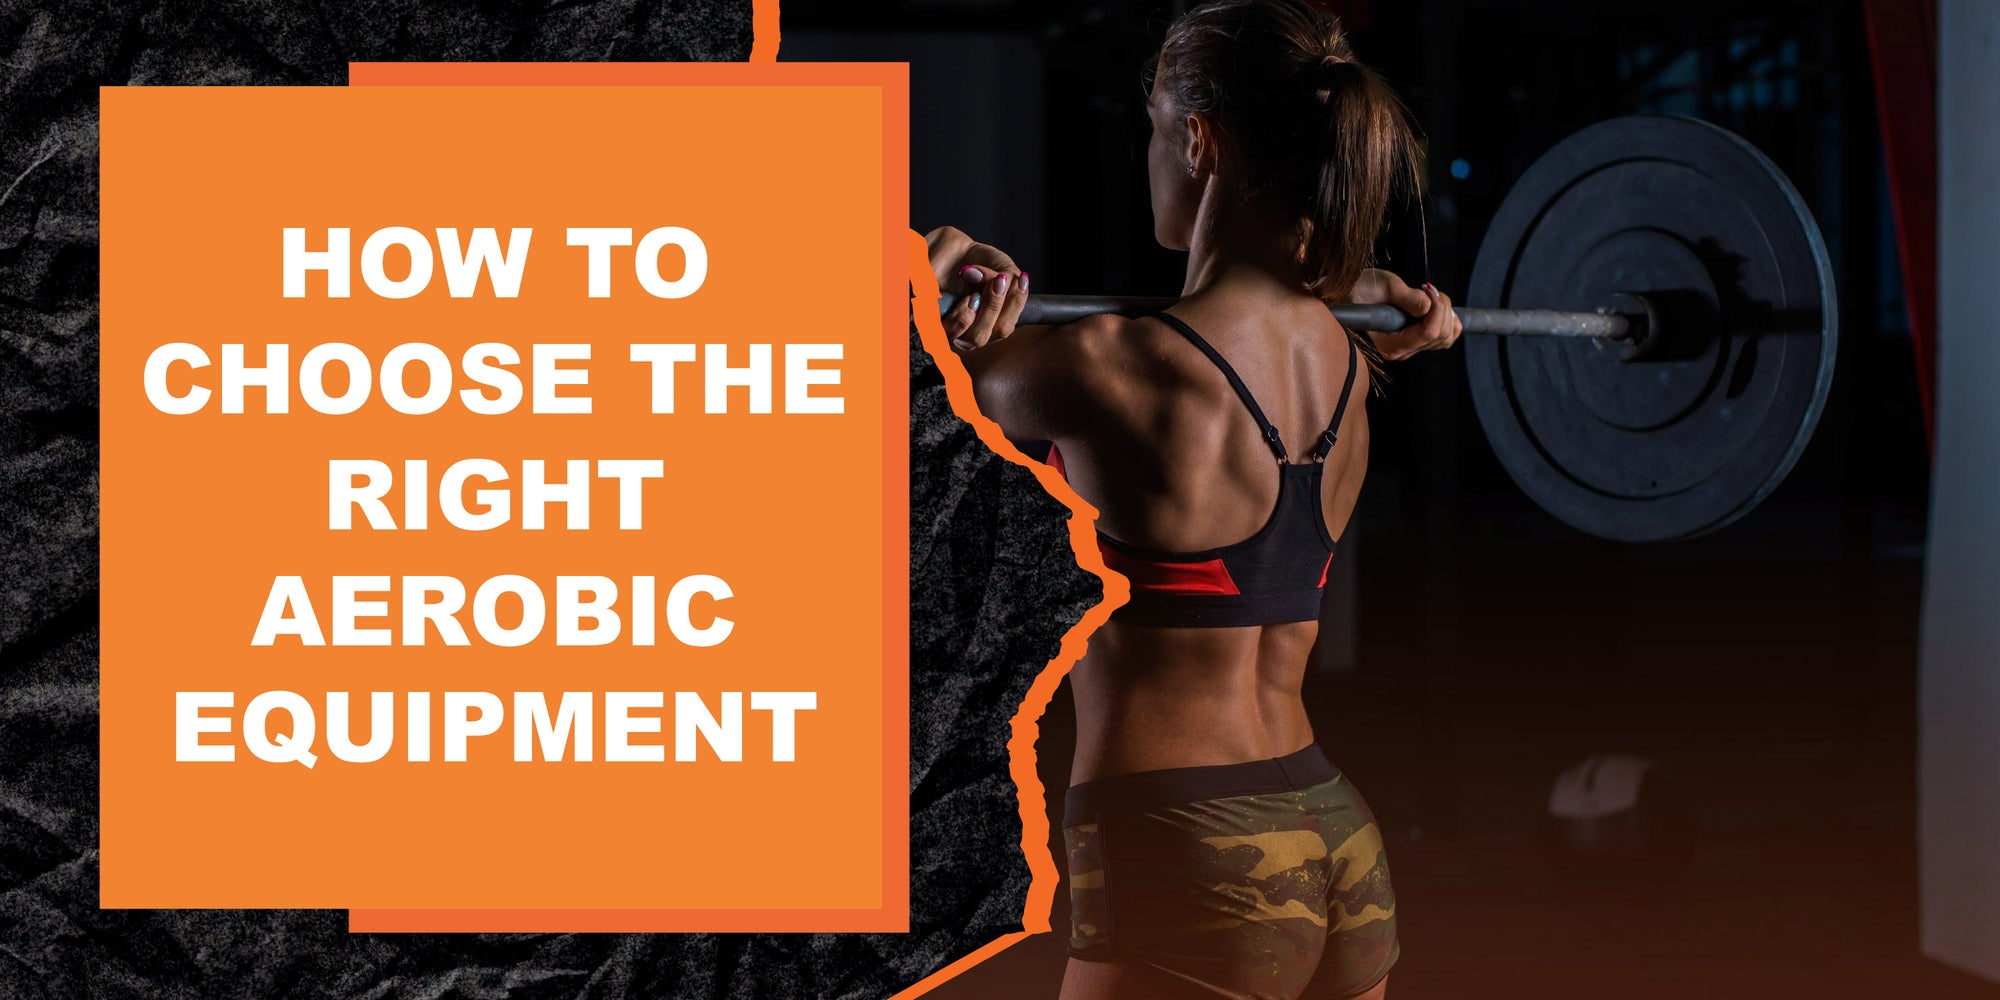 How to Choose the Right Aerobic Equipment